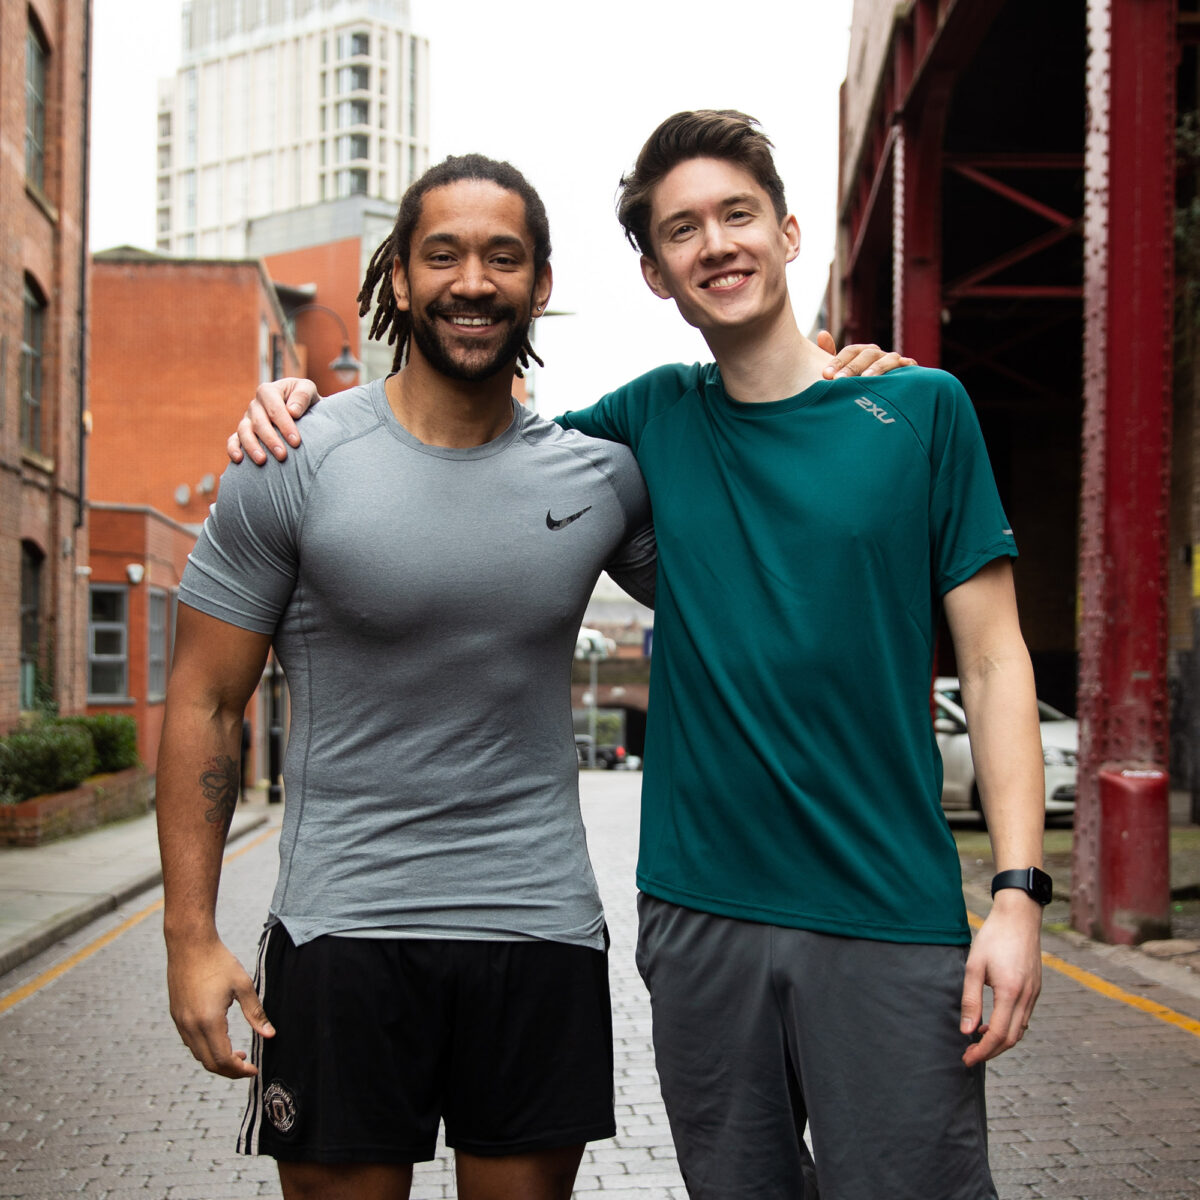 Two men standing on a street wearing running clothes, with their arms around each other.